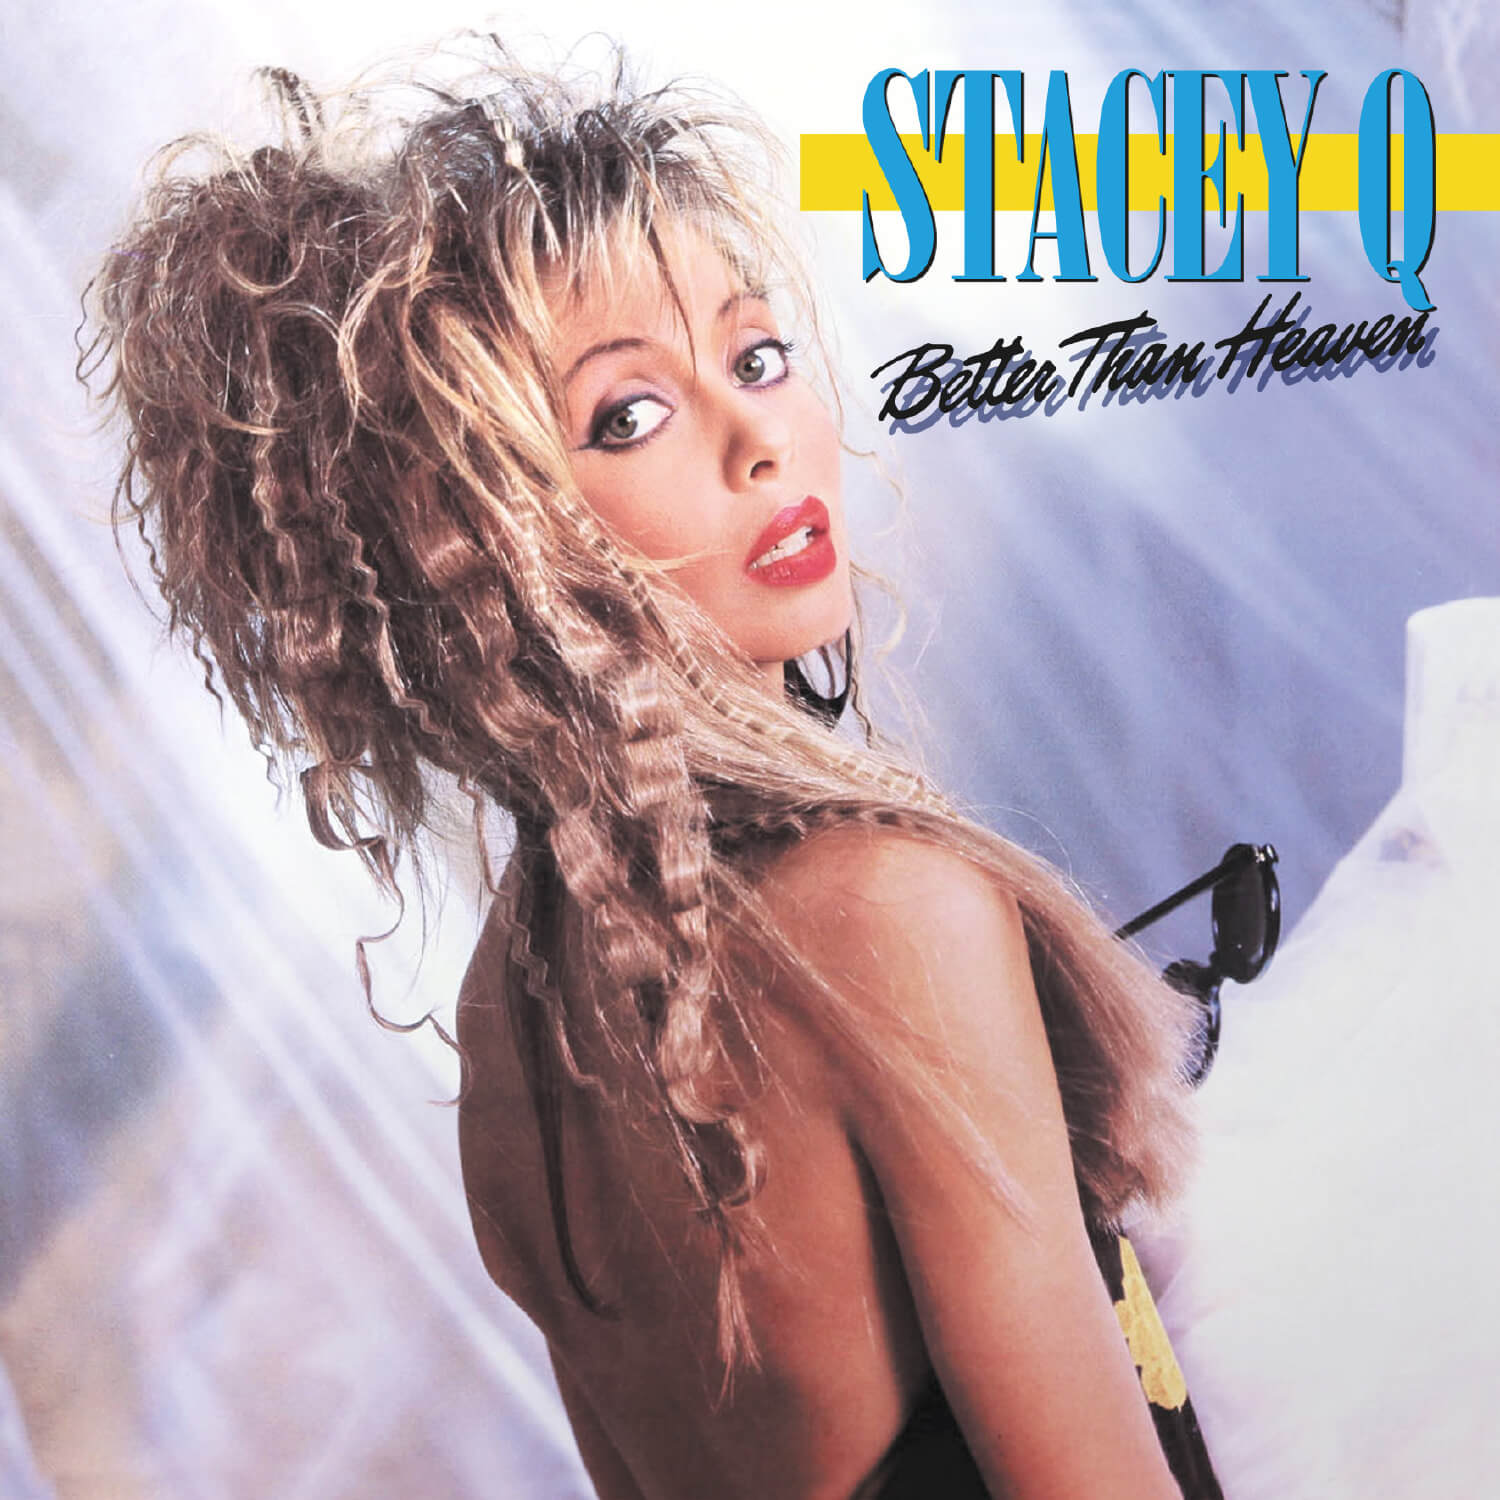 Stacey Q: Better Than Heaven (2 CD - Imported)